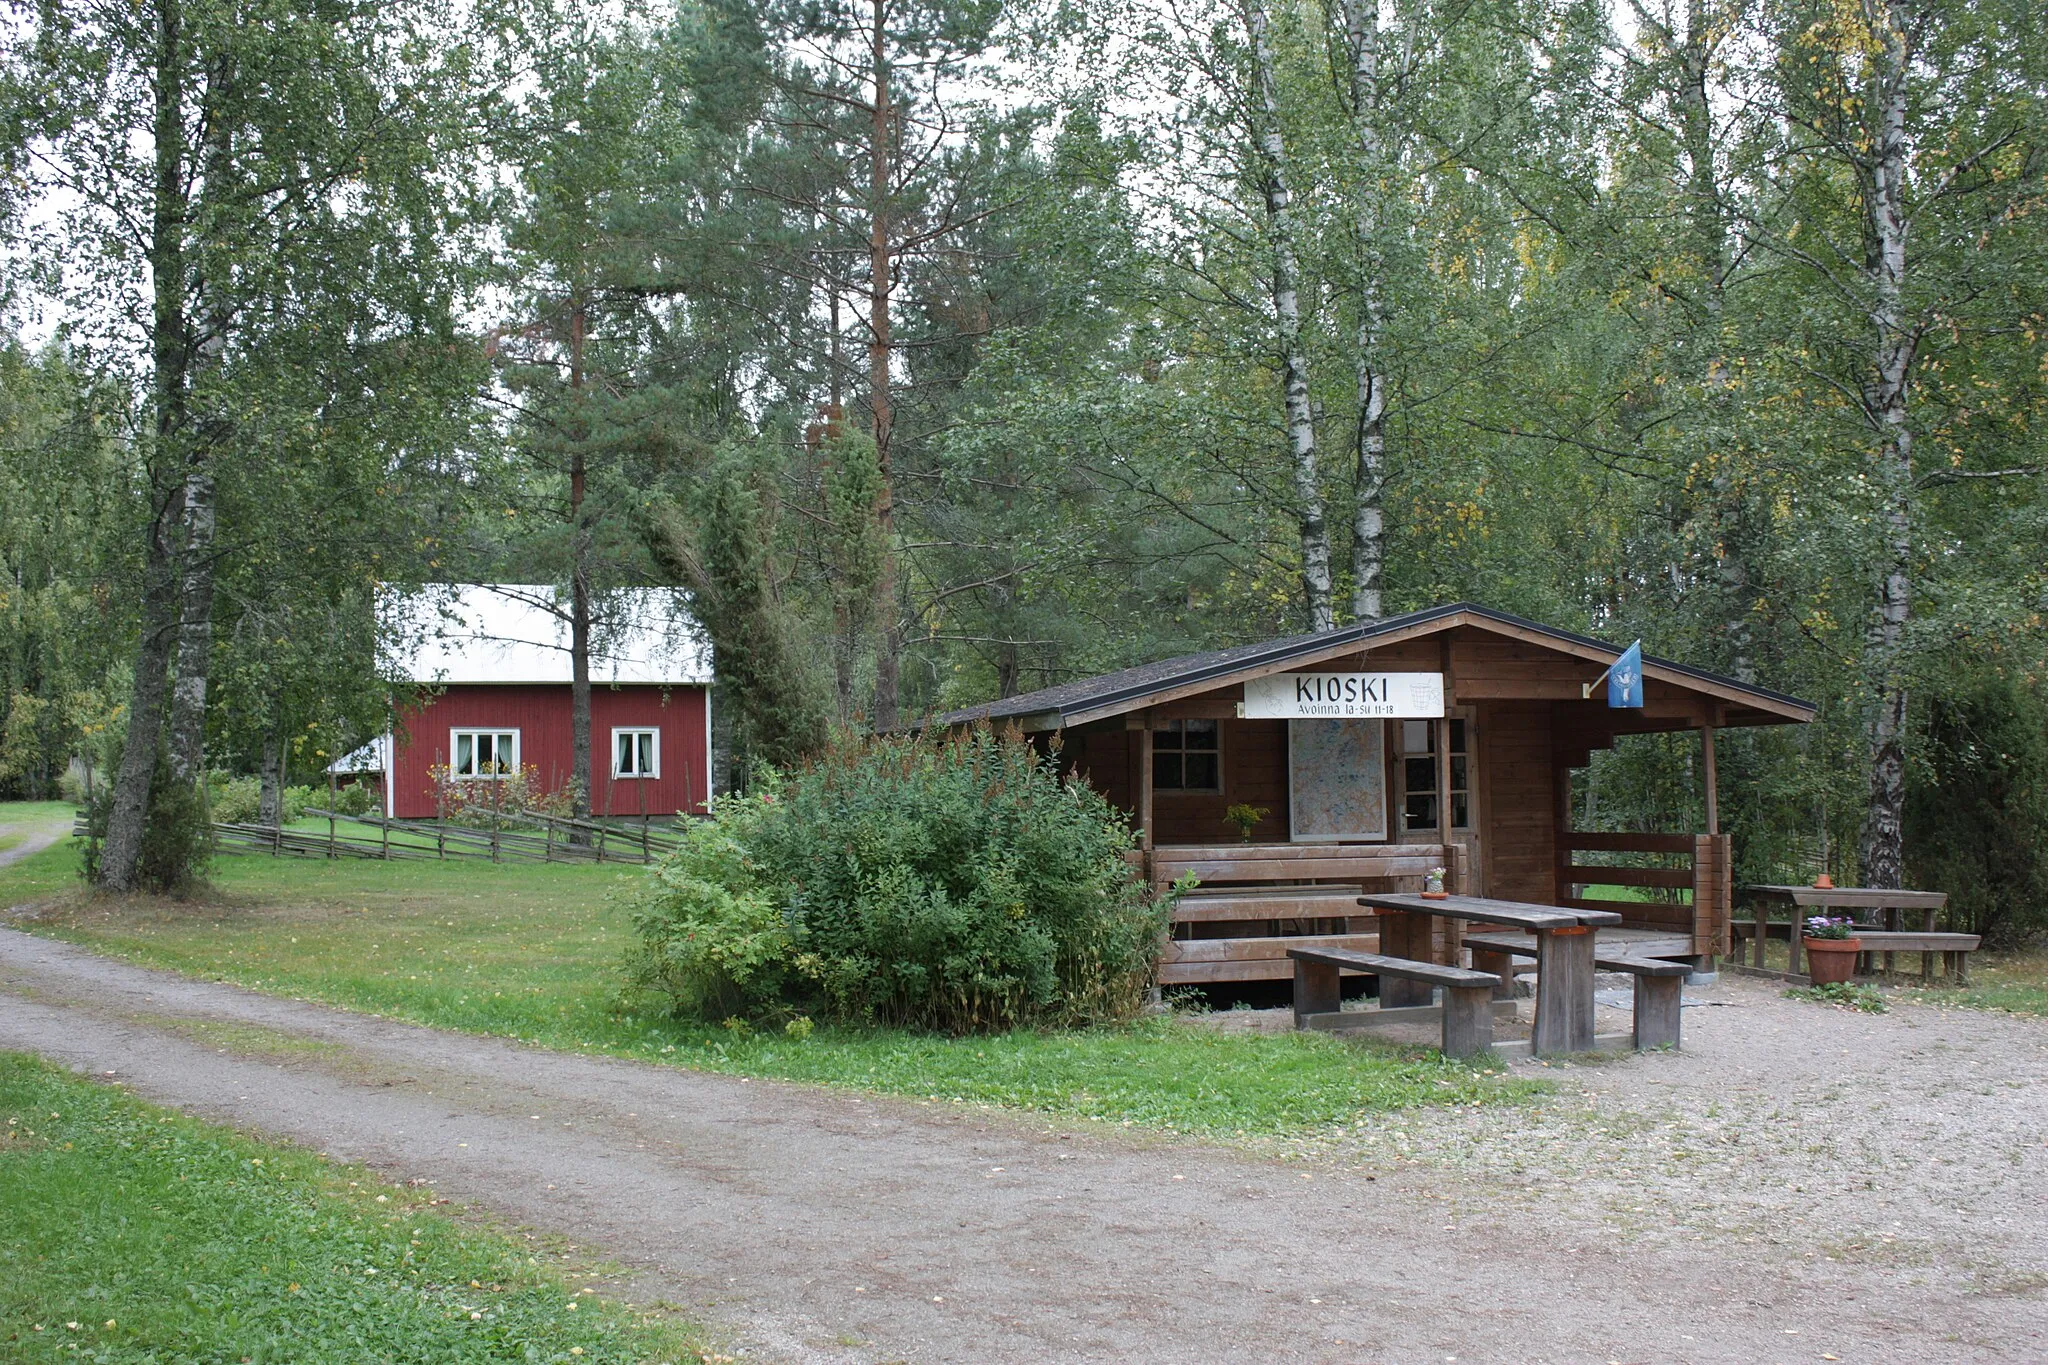 Photo showing: Rantapiha recreational area by the lake Savojärvi near Kurjenrahka National Park in Nousiainen, Finland Pictured are the kiosk in front and the red main building in the back